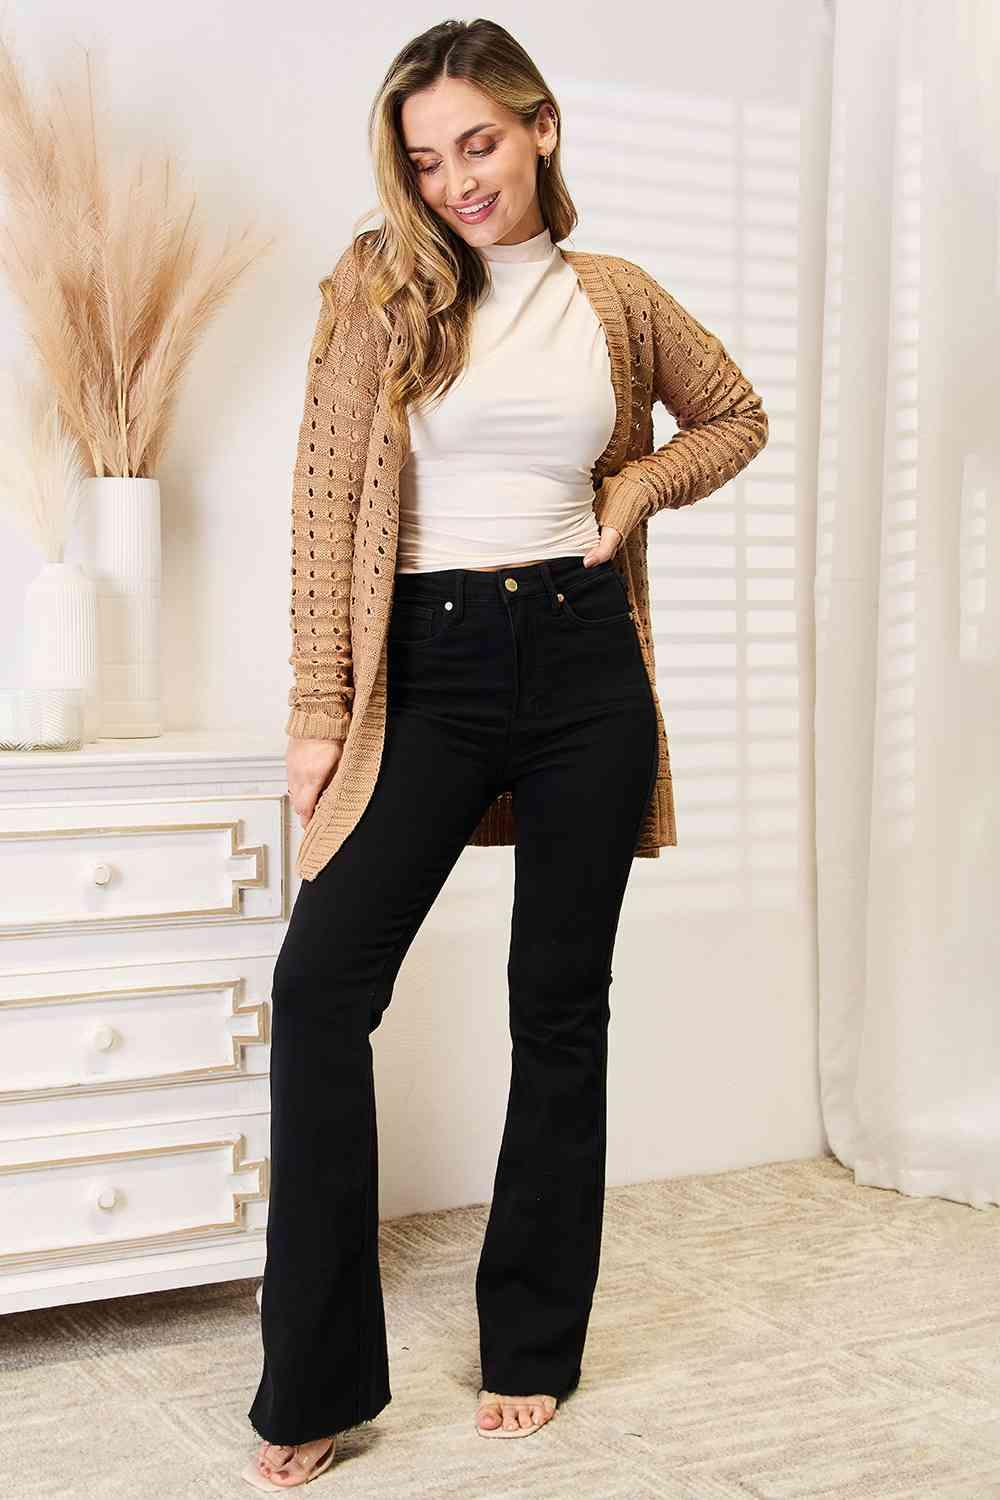 Woven Right Openwork Horizontal Ribbing Open Front Cardigan - AMIClubwear